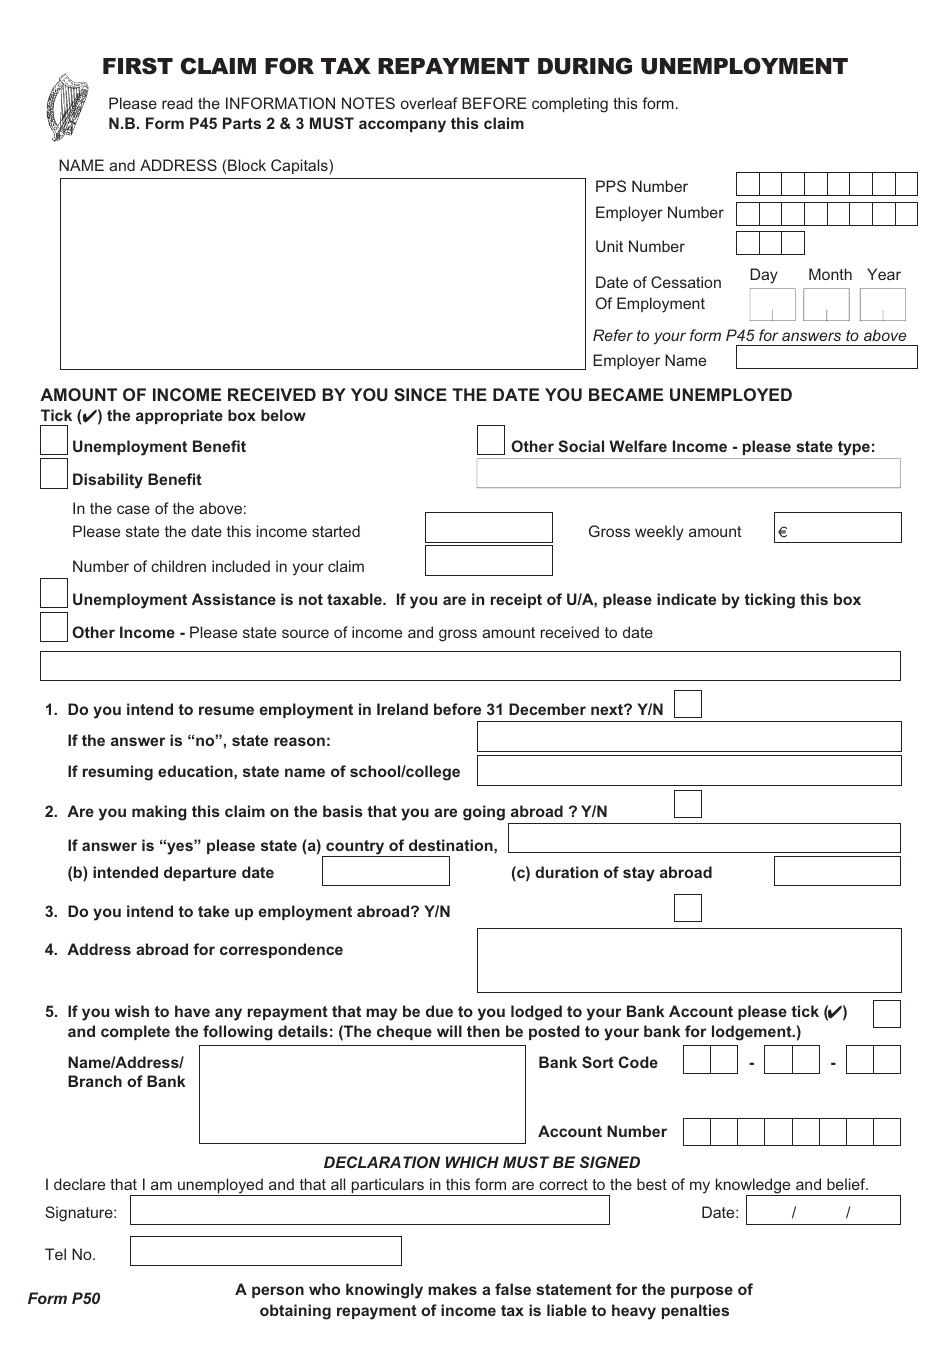 form-p50-download-fillable-pdf-or-fill-online-first-claim-for-tax